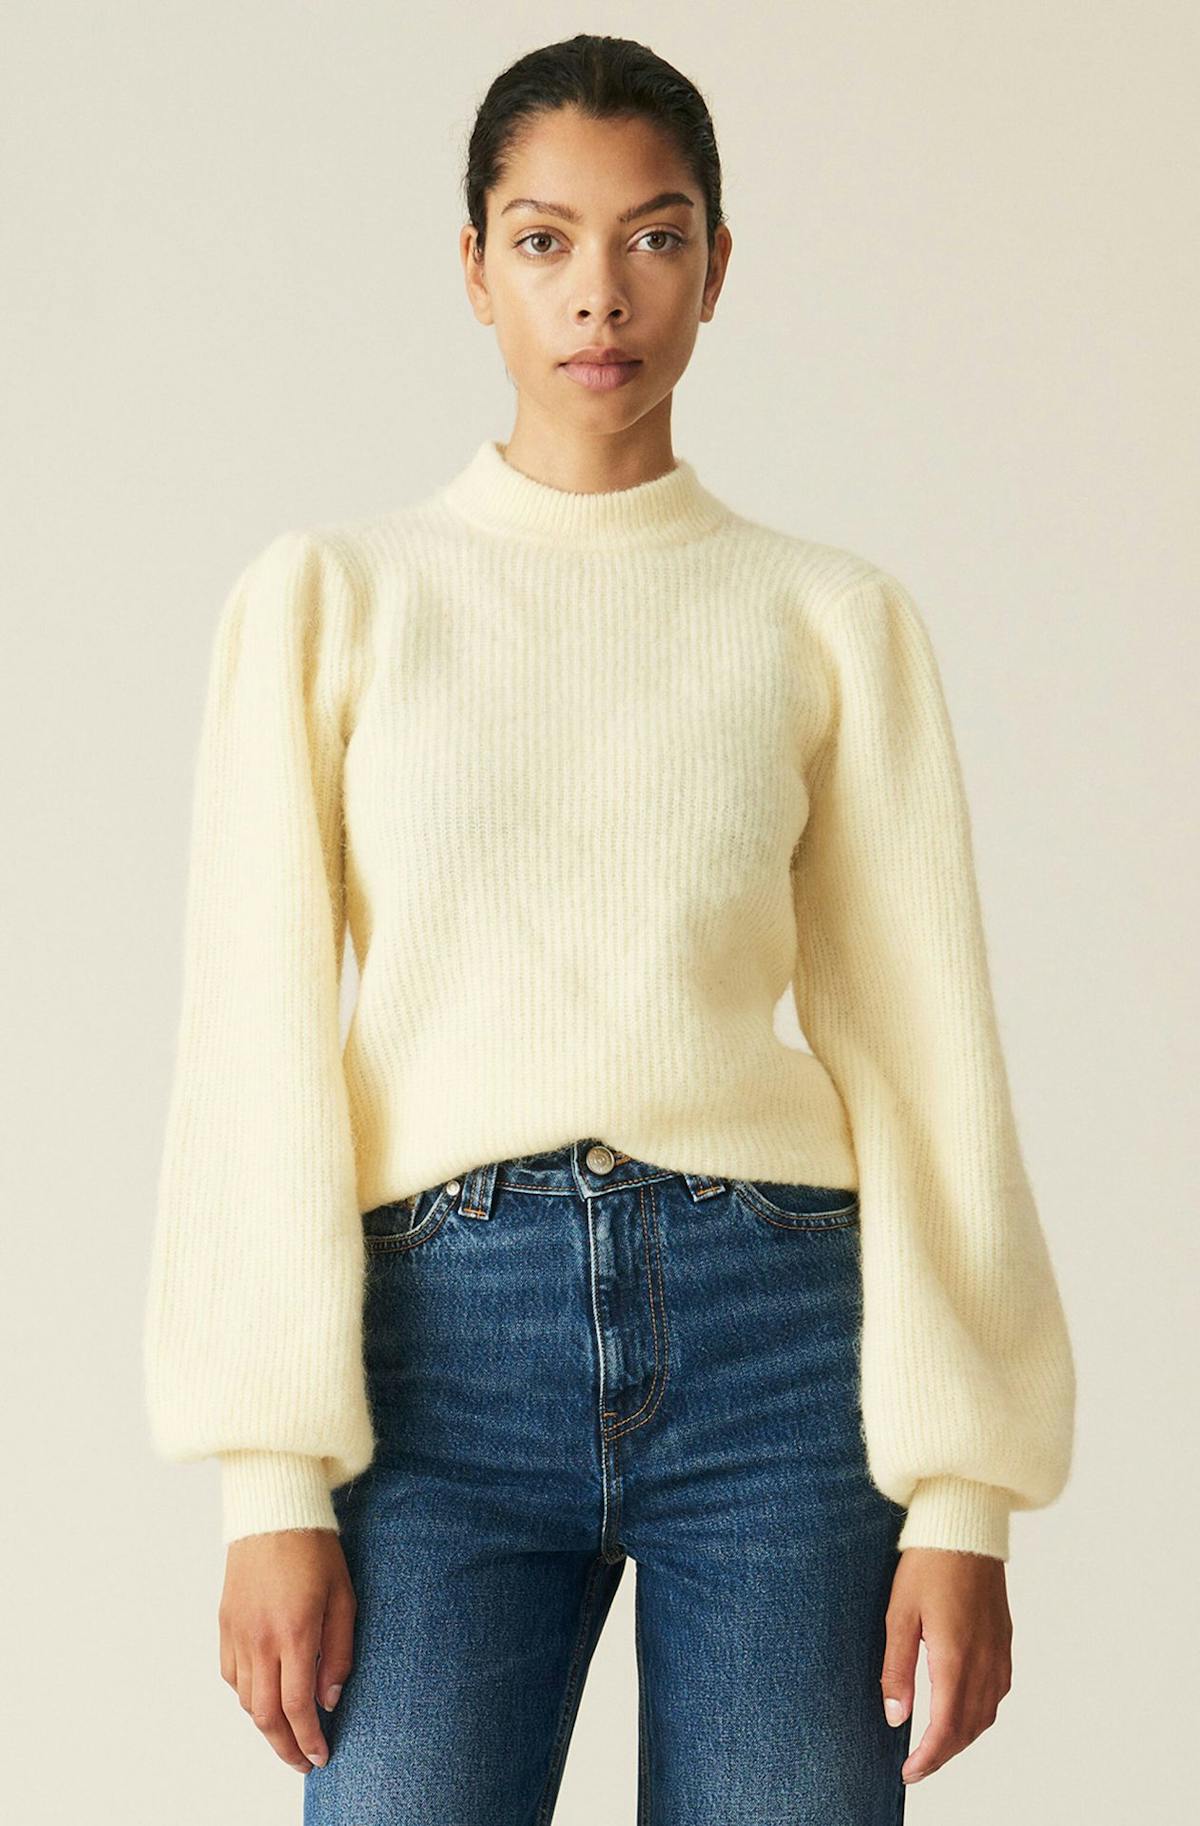 Shop the best white and cream jumpers to wear now